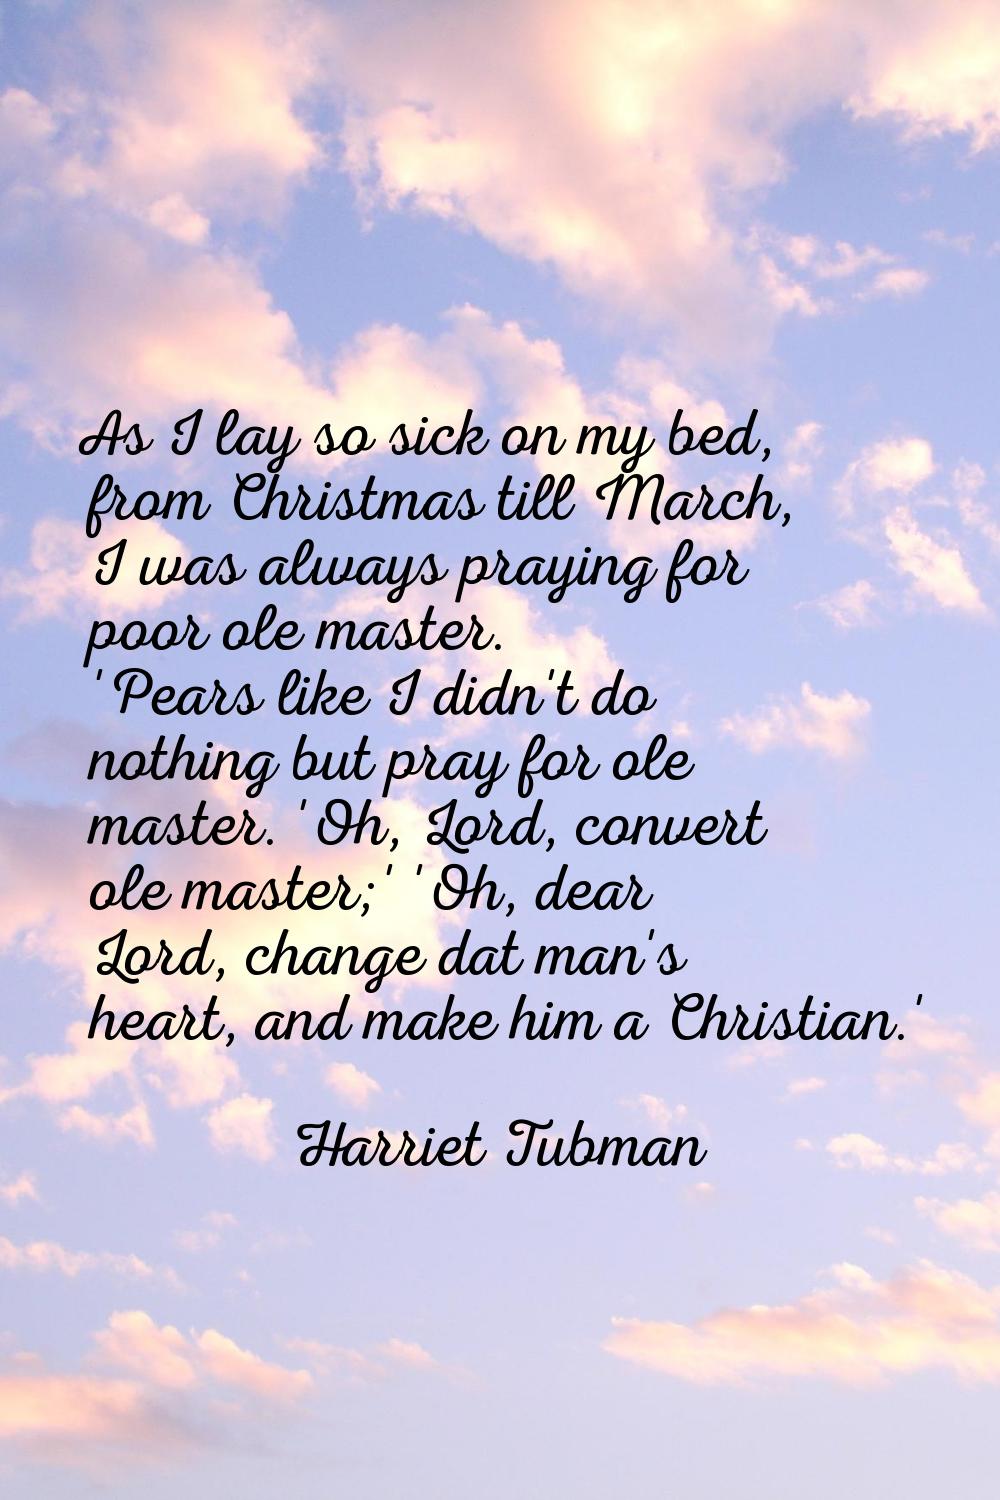 As I lay so sick on my bed, from Christmas till March, I was always praying for poor ole master. 'P